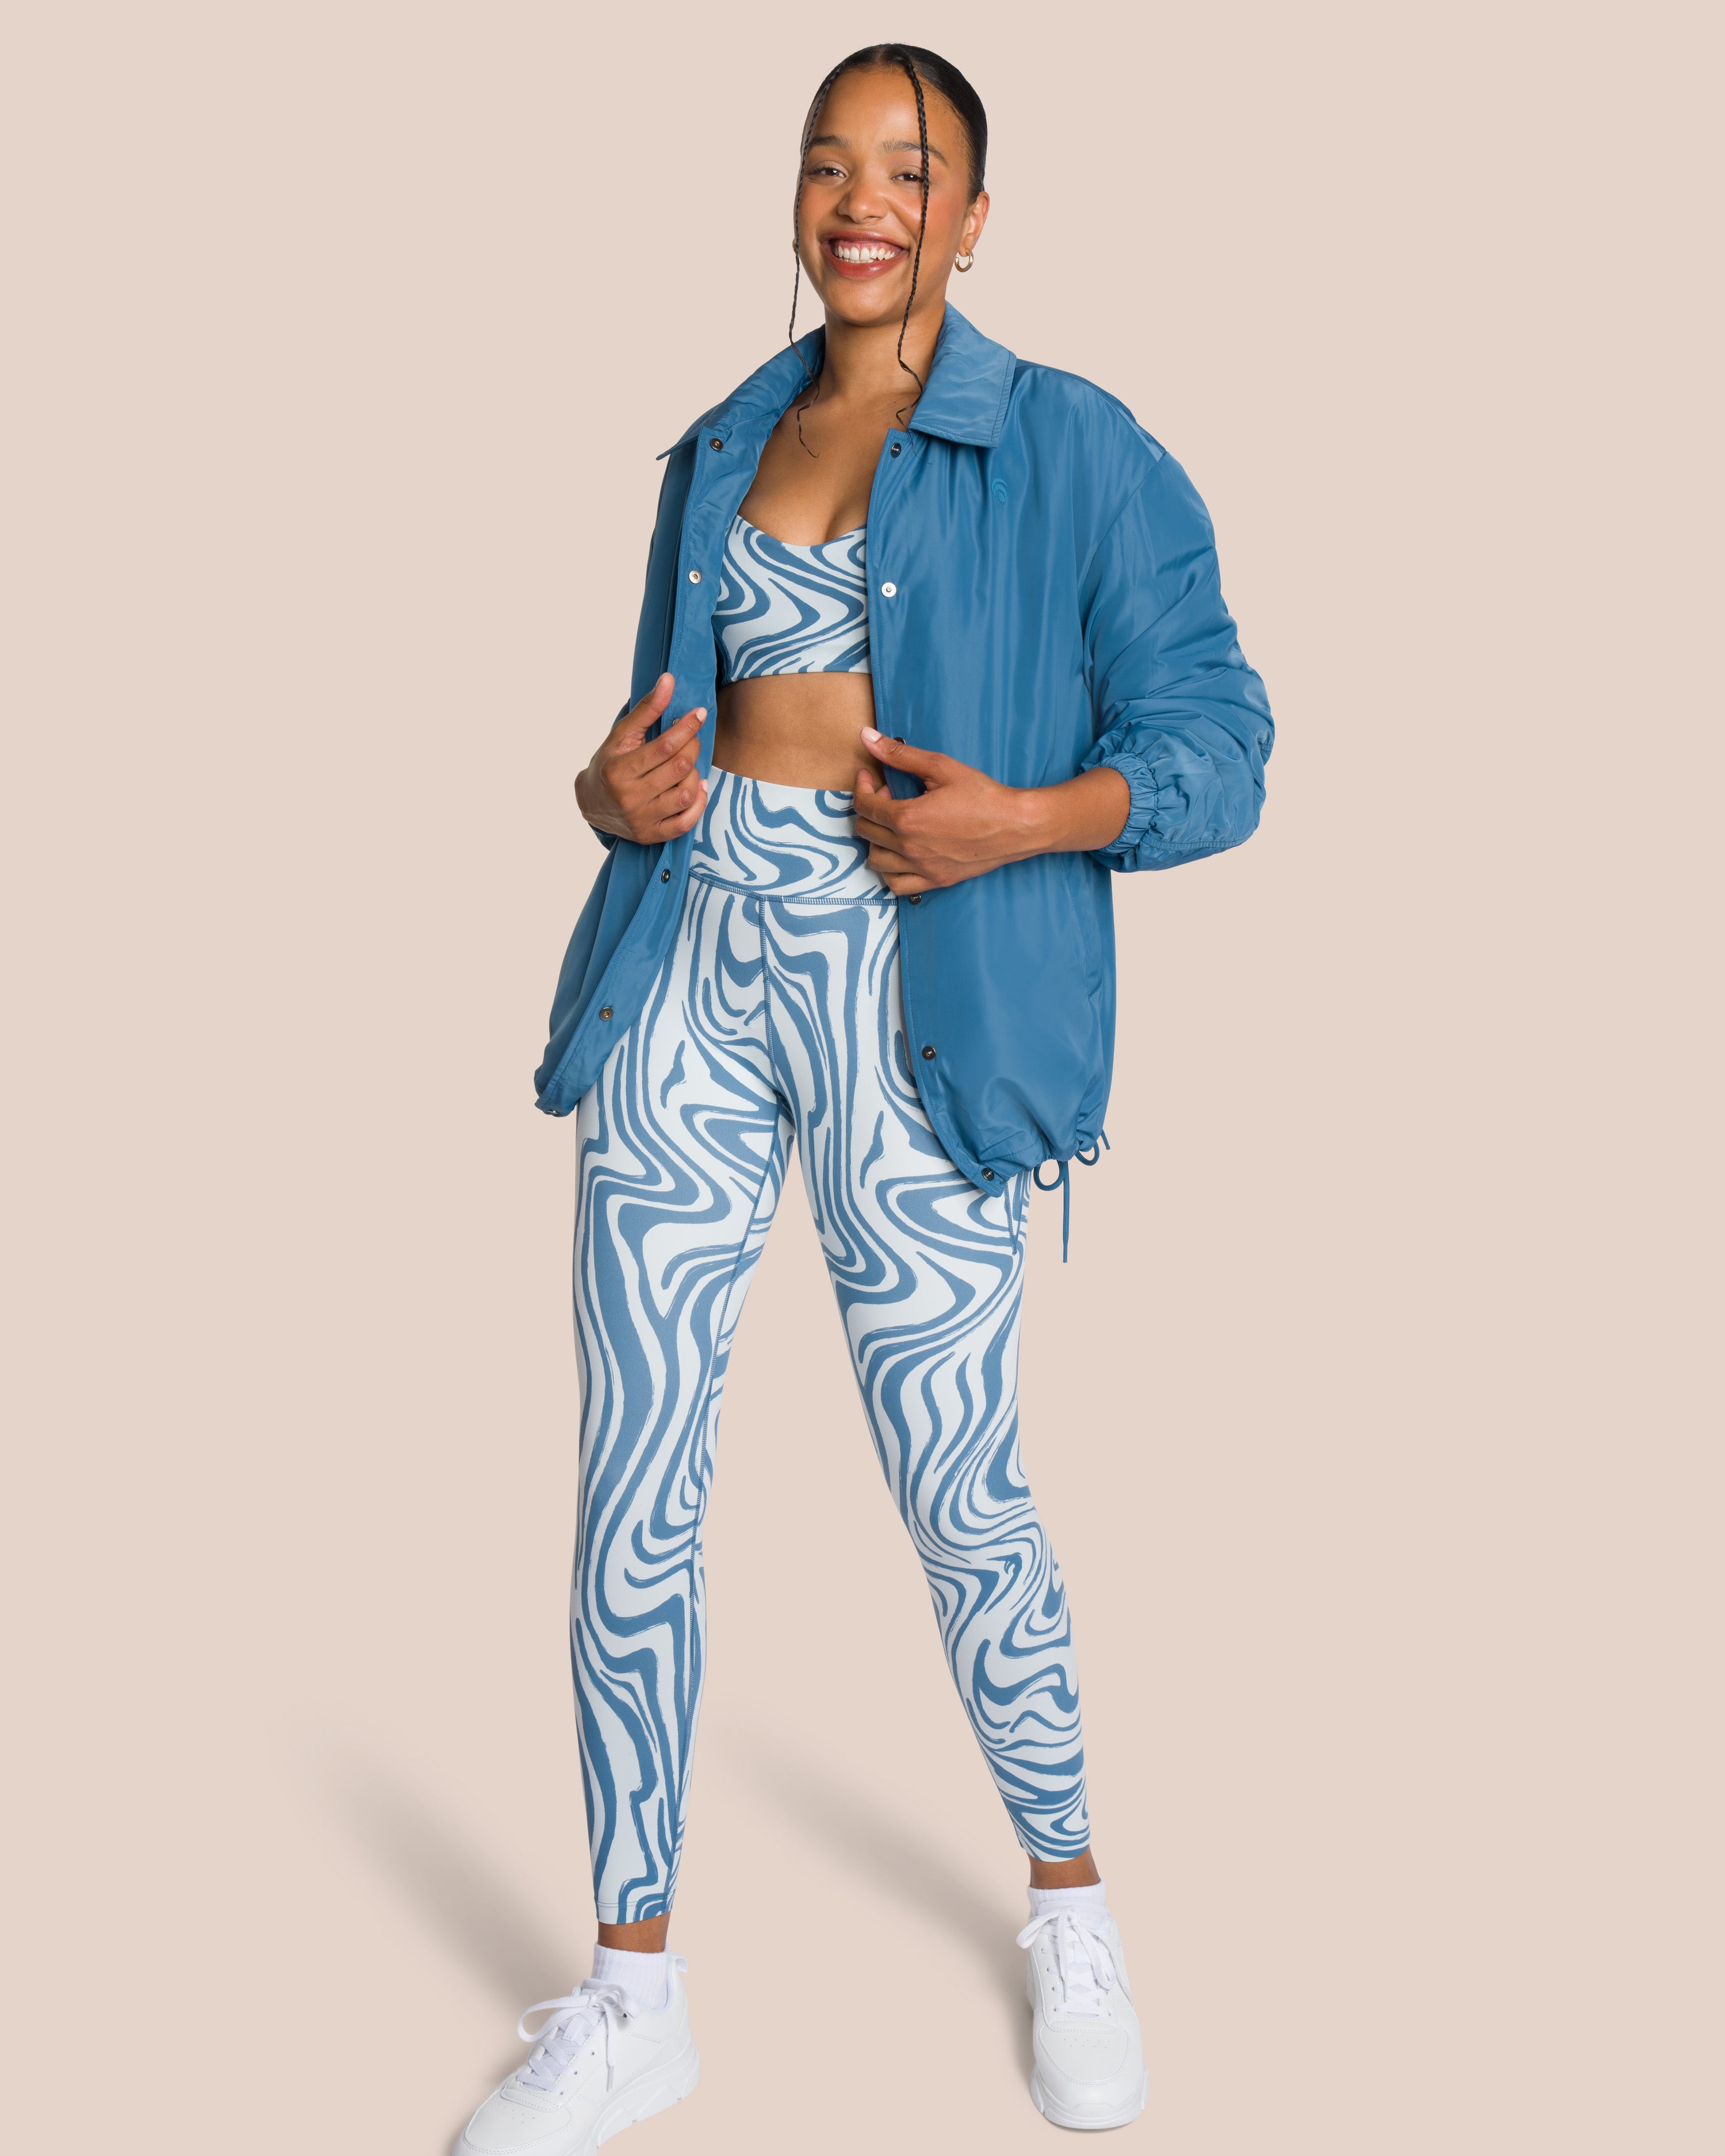 Shania Set Deluxe - Ice Blue Swirl & Teal